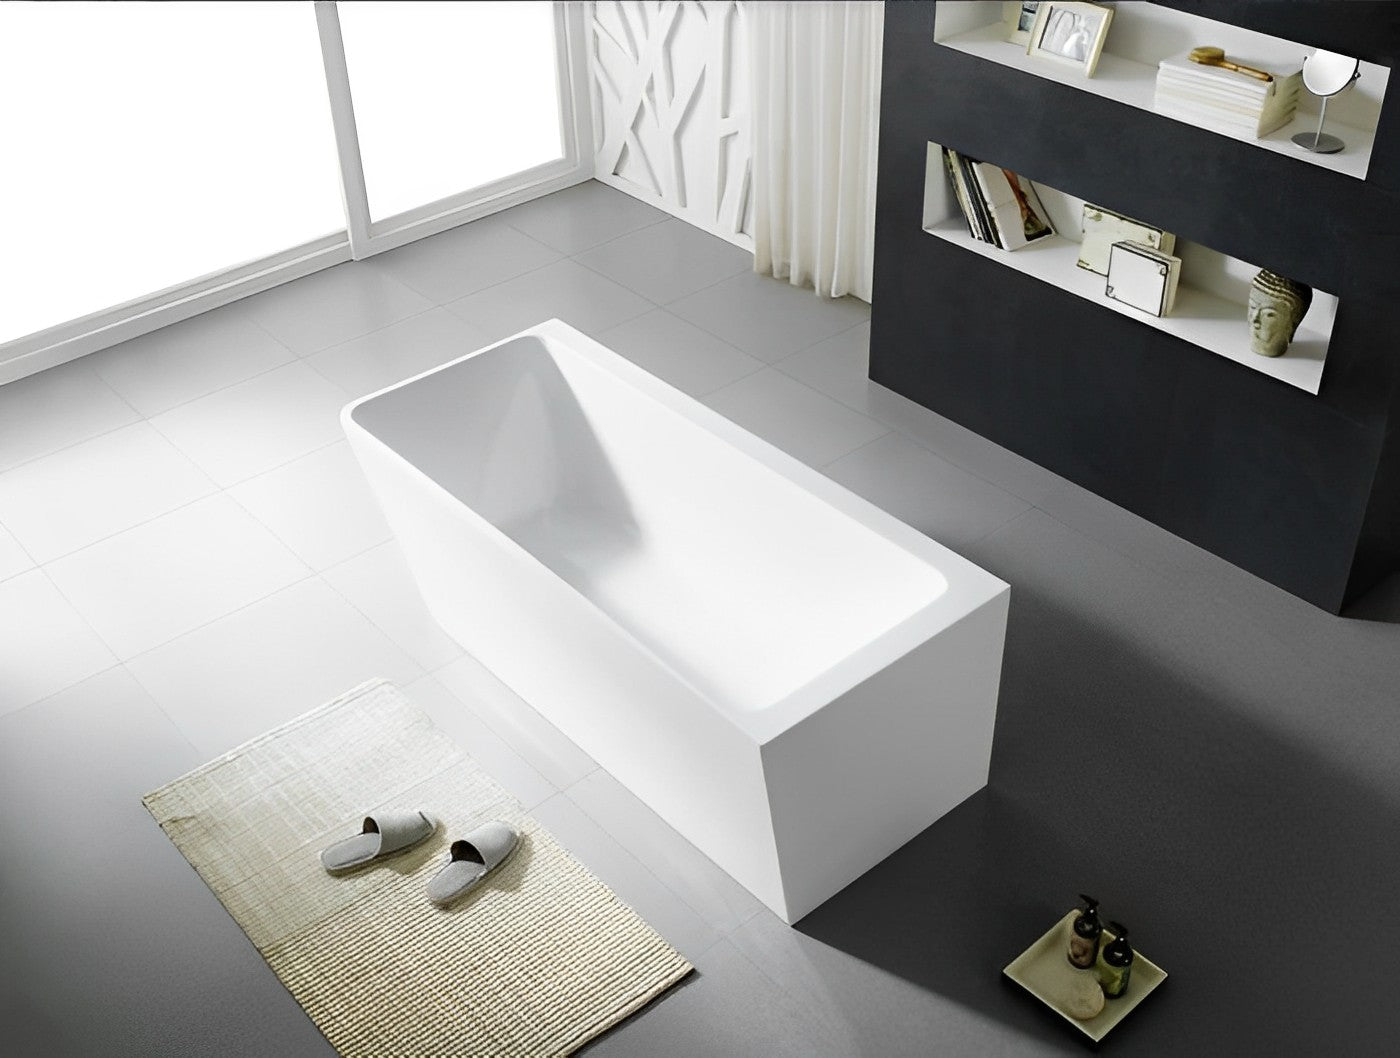 POSEIDON GLOSS WHITE AVIS LEFT CORNER BACK TO WALL BATHTUB (AVAILABLE IN 1500MM AND 1700MM)